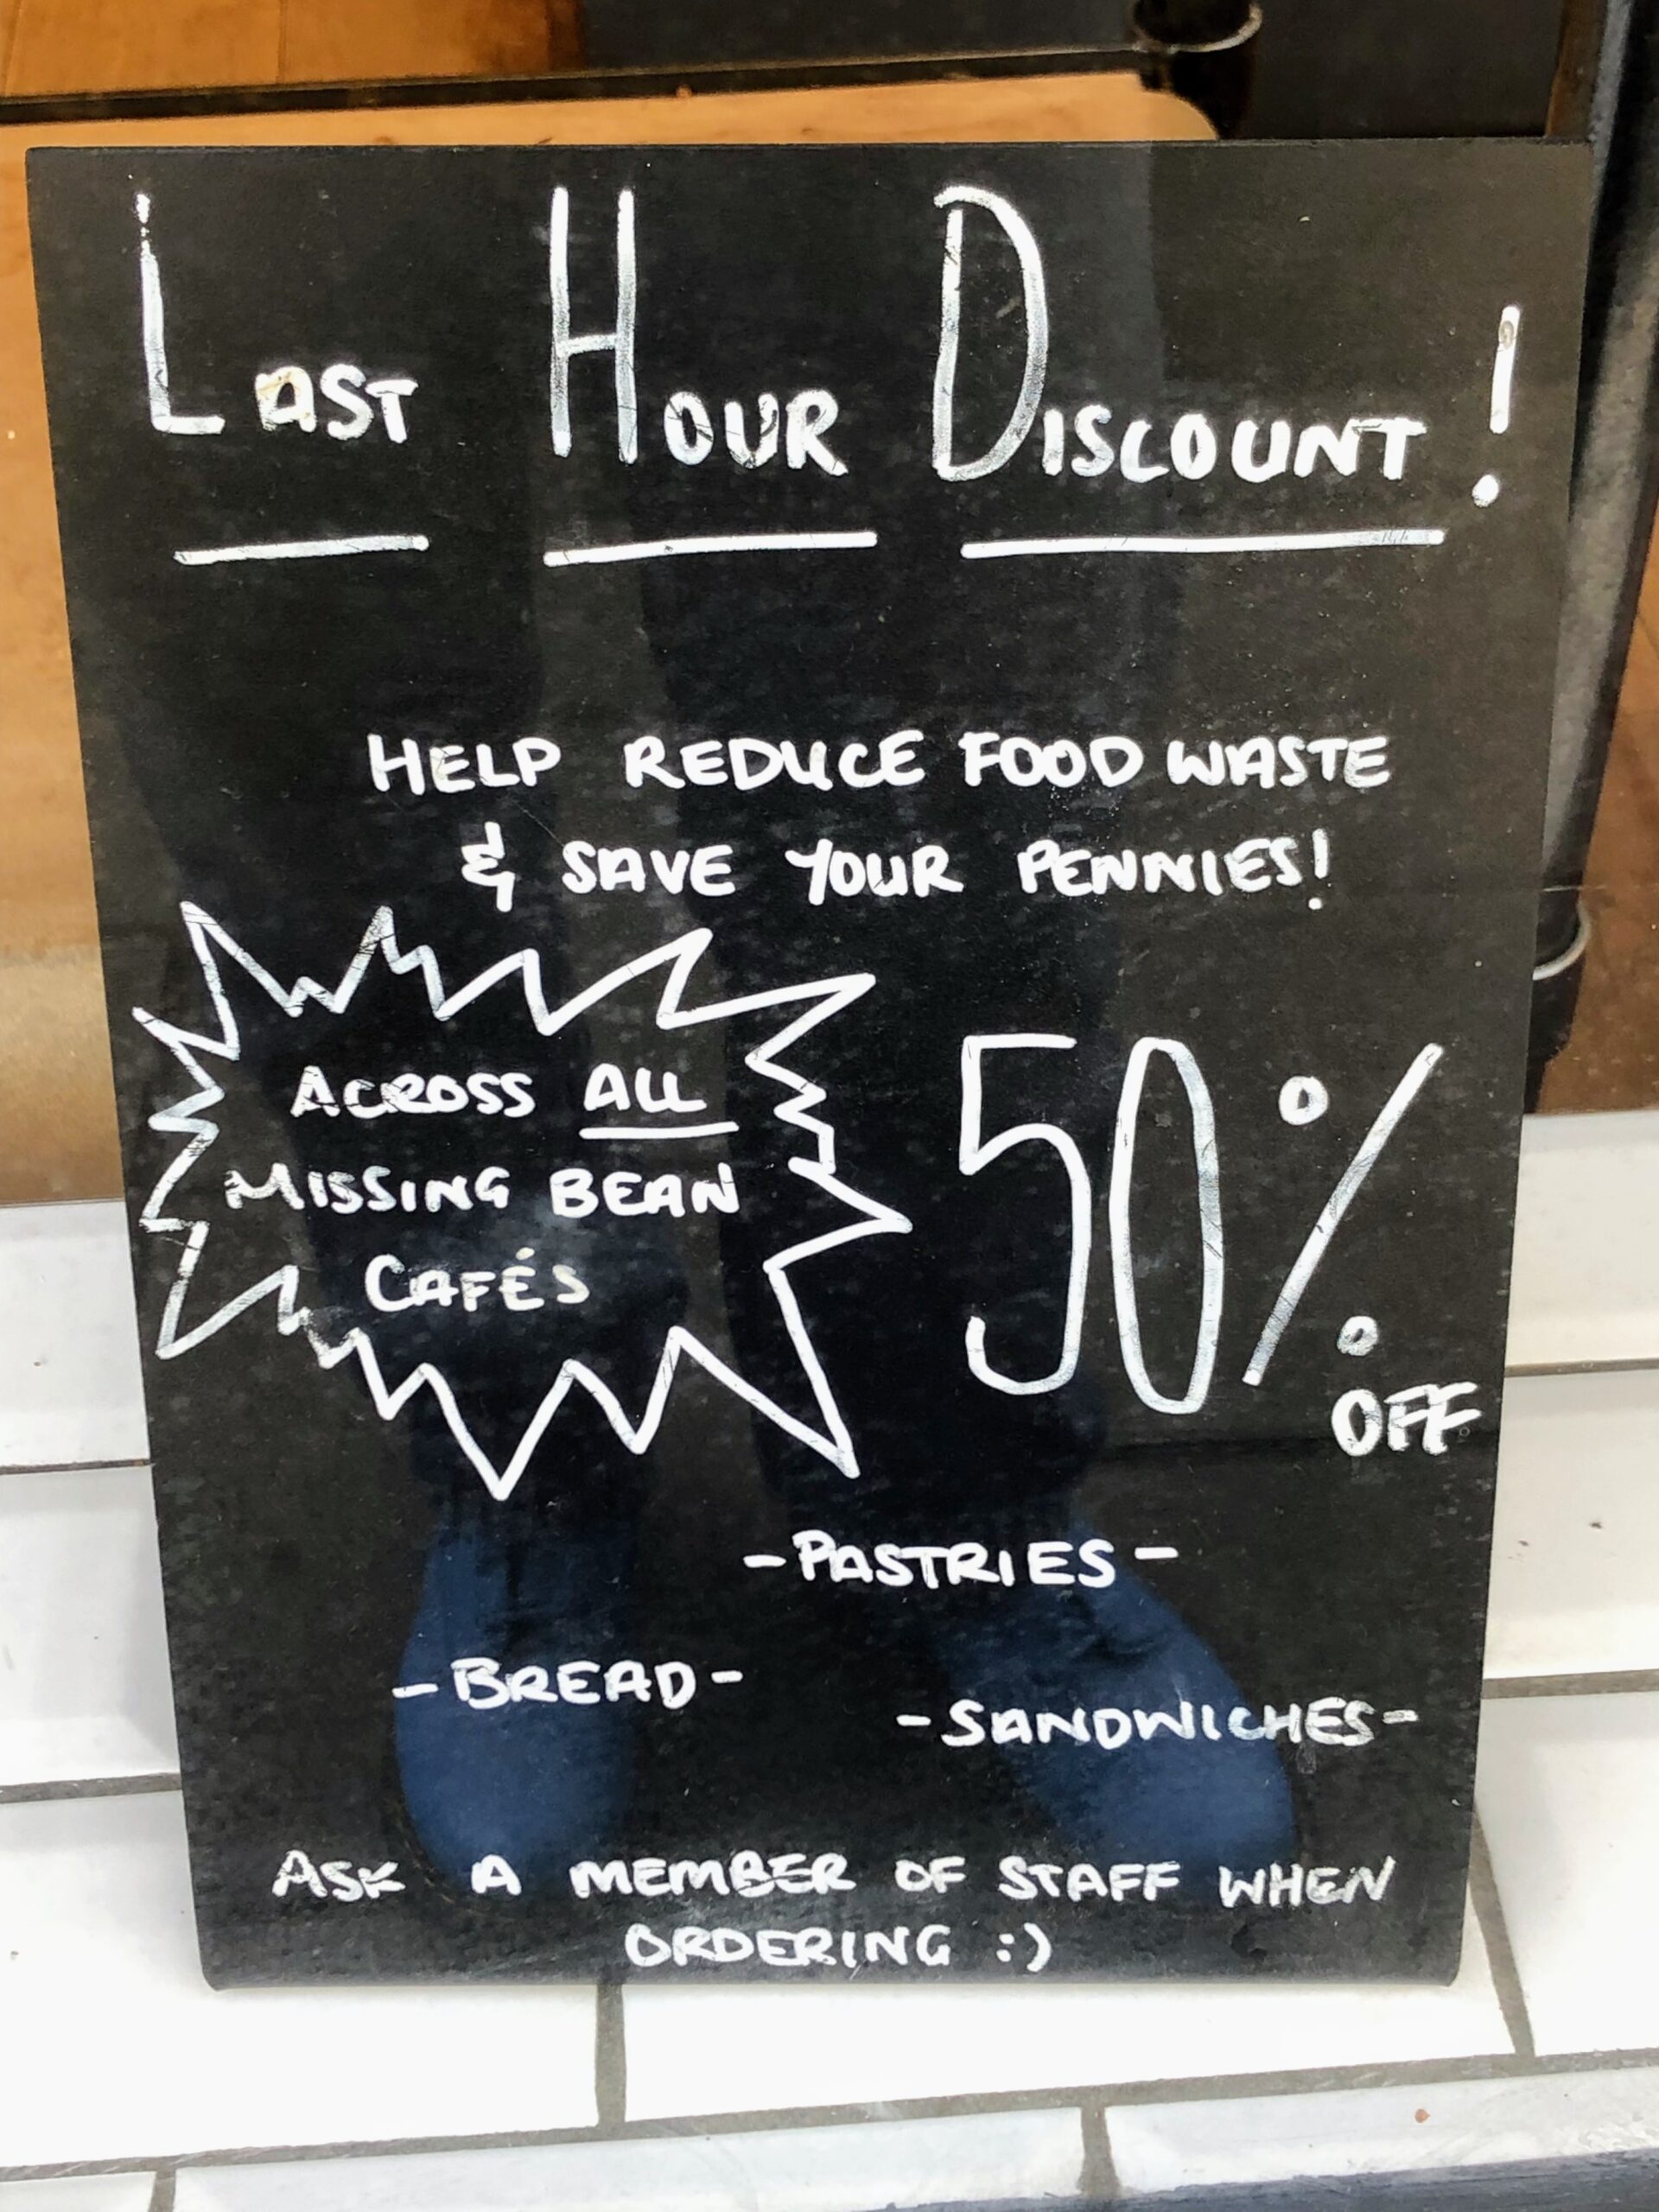 Missing Bean, last hour discount sign